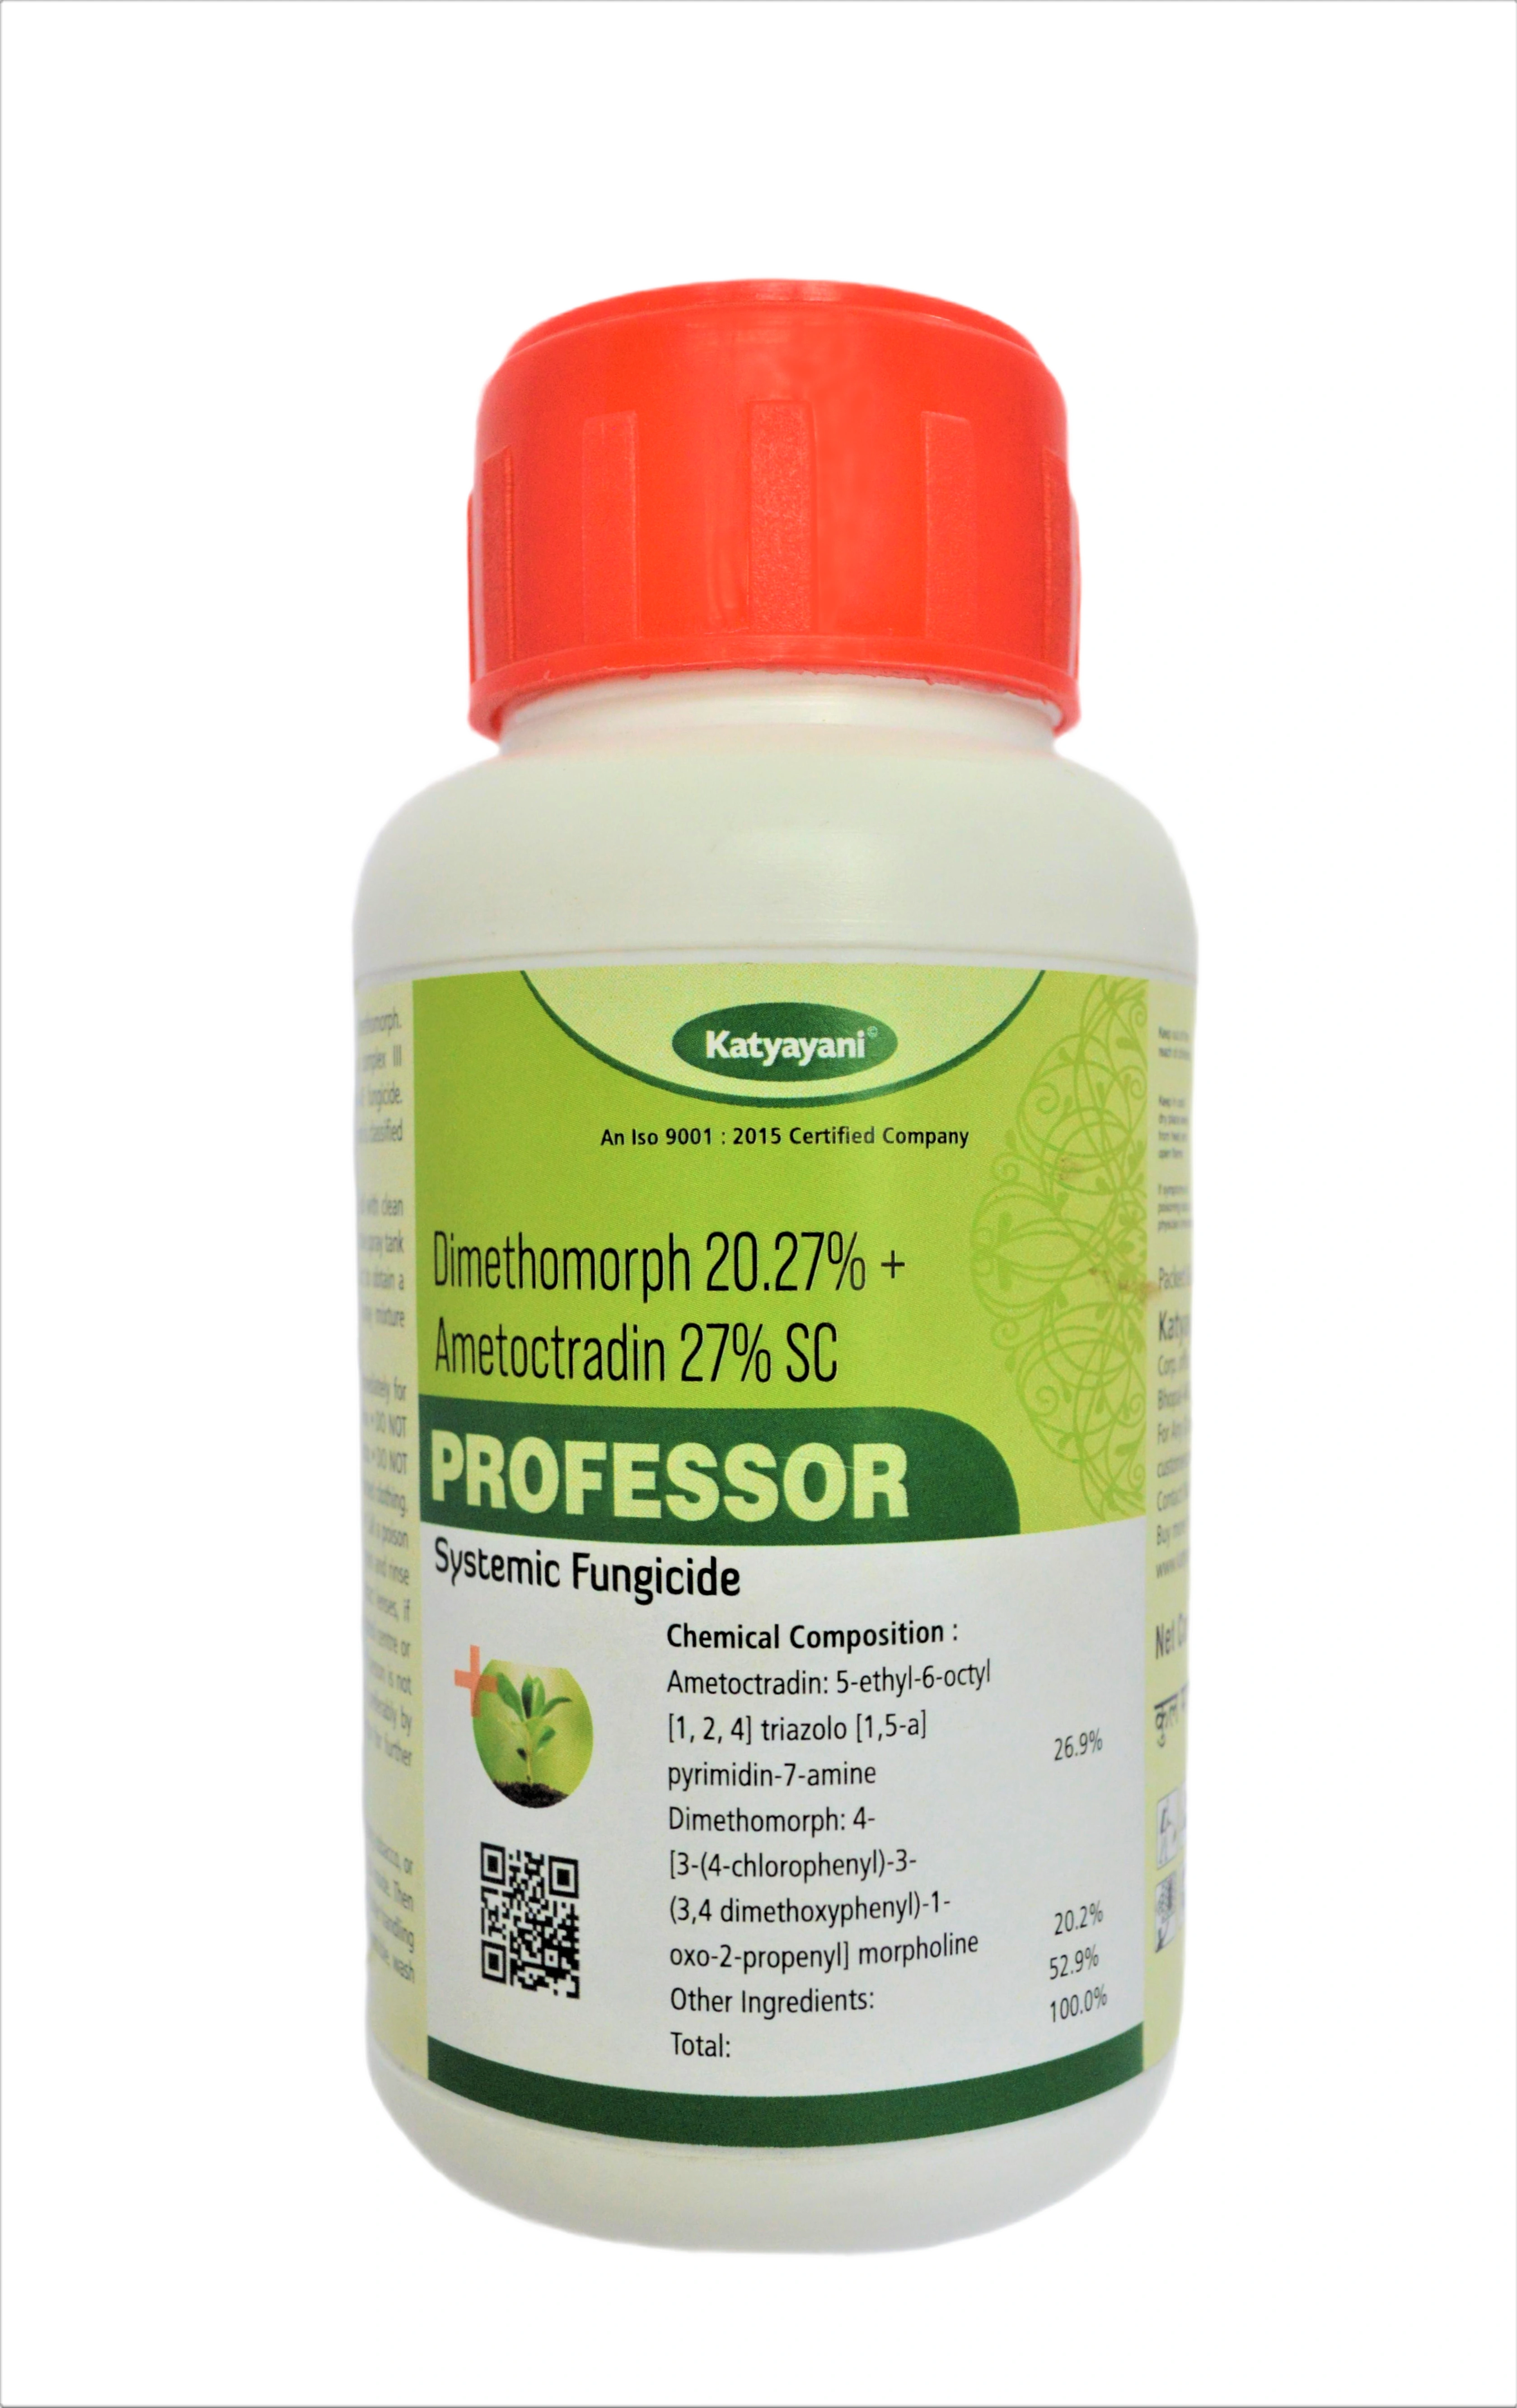 Katyayani Ametoctradin 27% + Dimethomorph 20.27% SC Systemic Fungicide with Super Powerful Control of Late Blight and Downy Mildew on Grapes Cucumber Potato-11375986